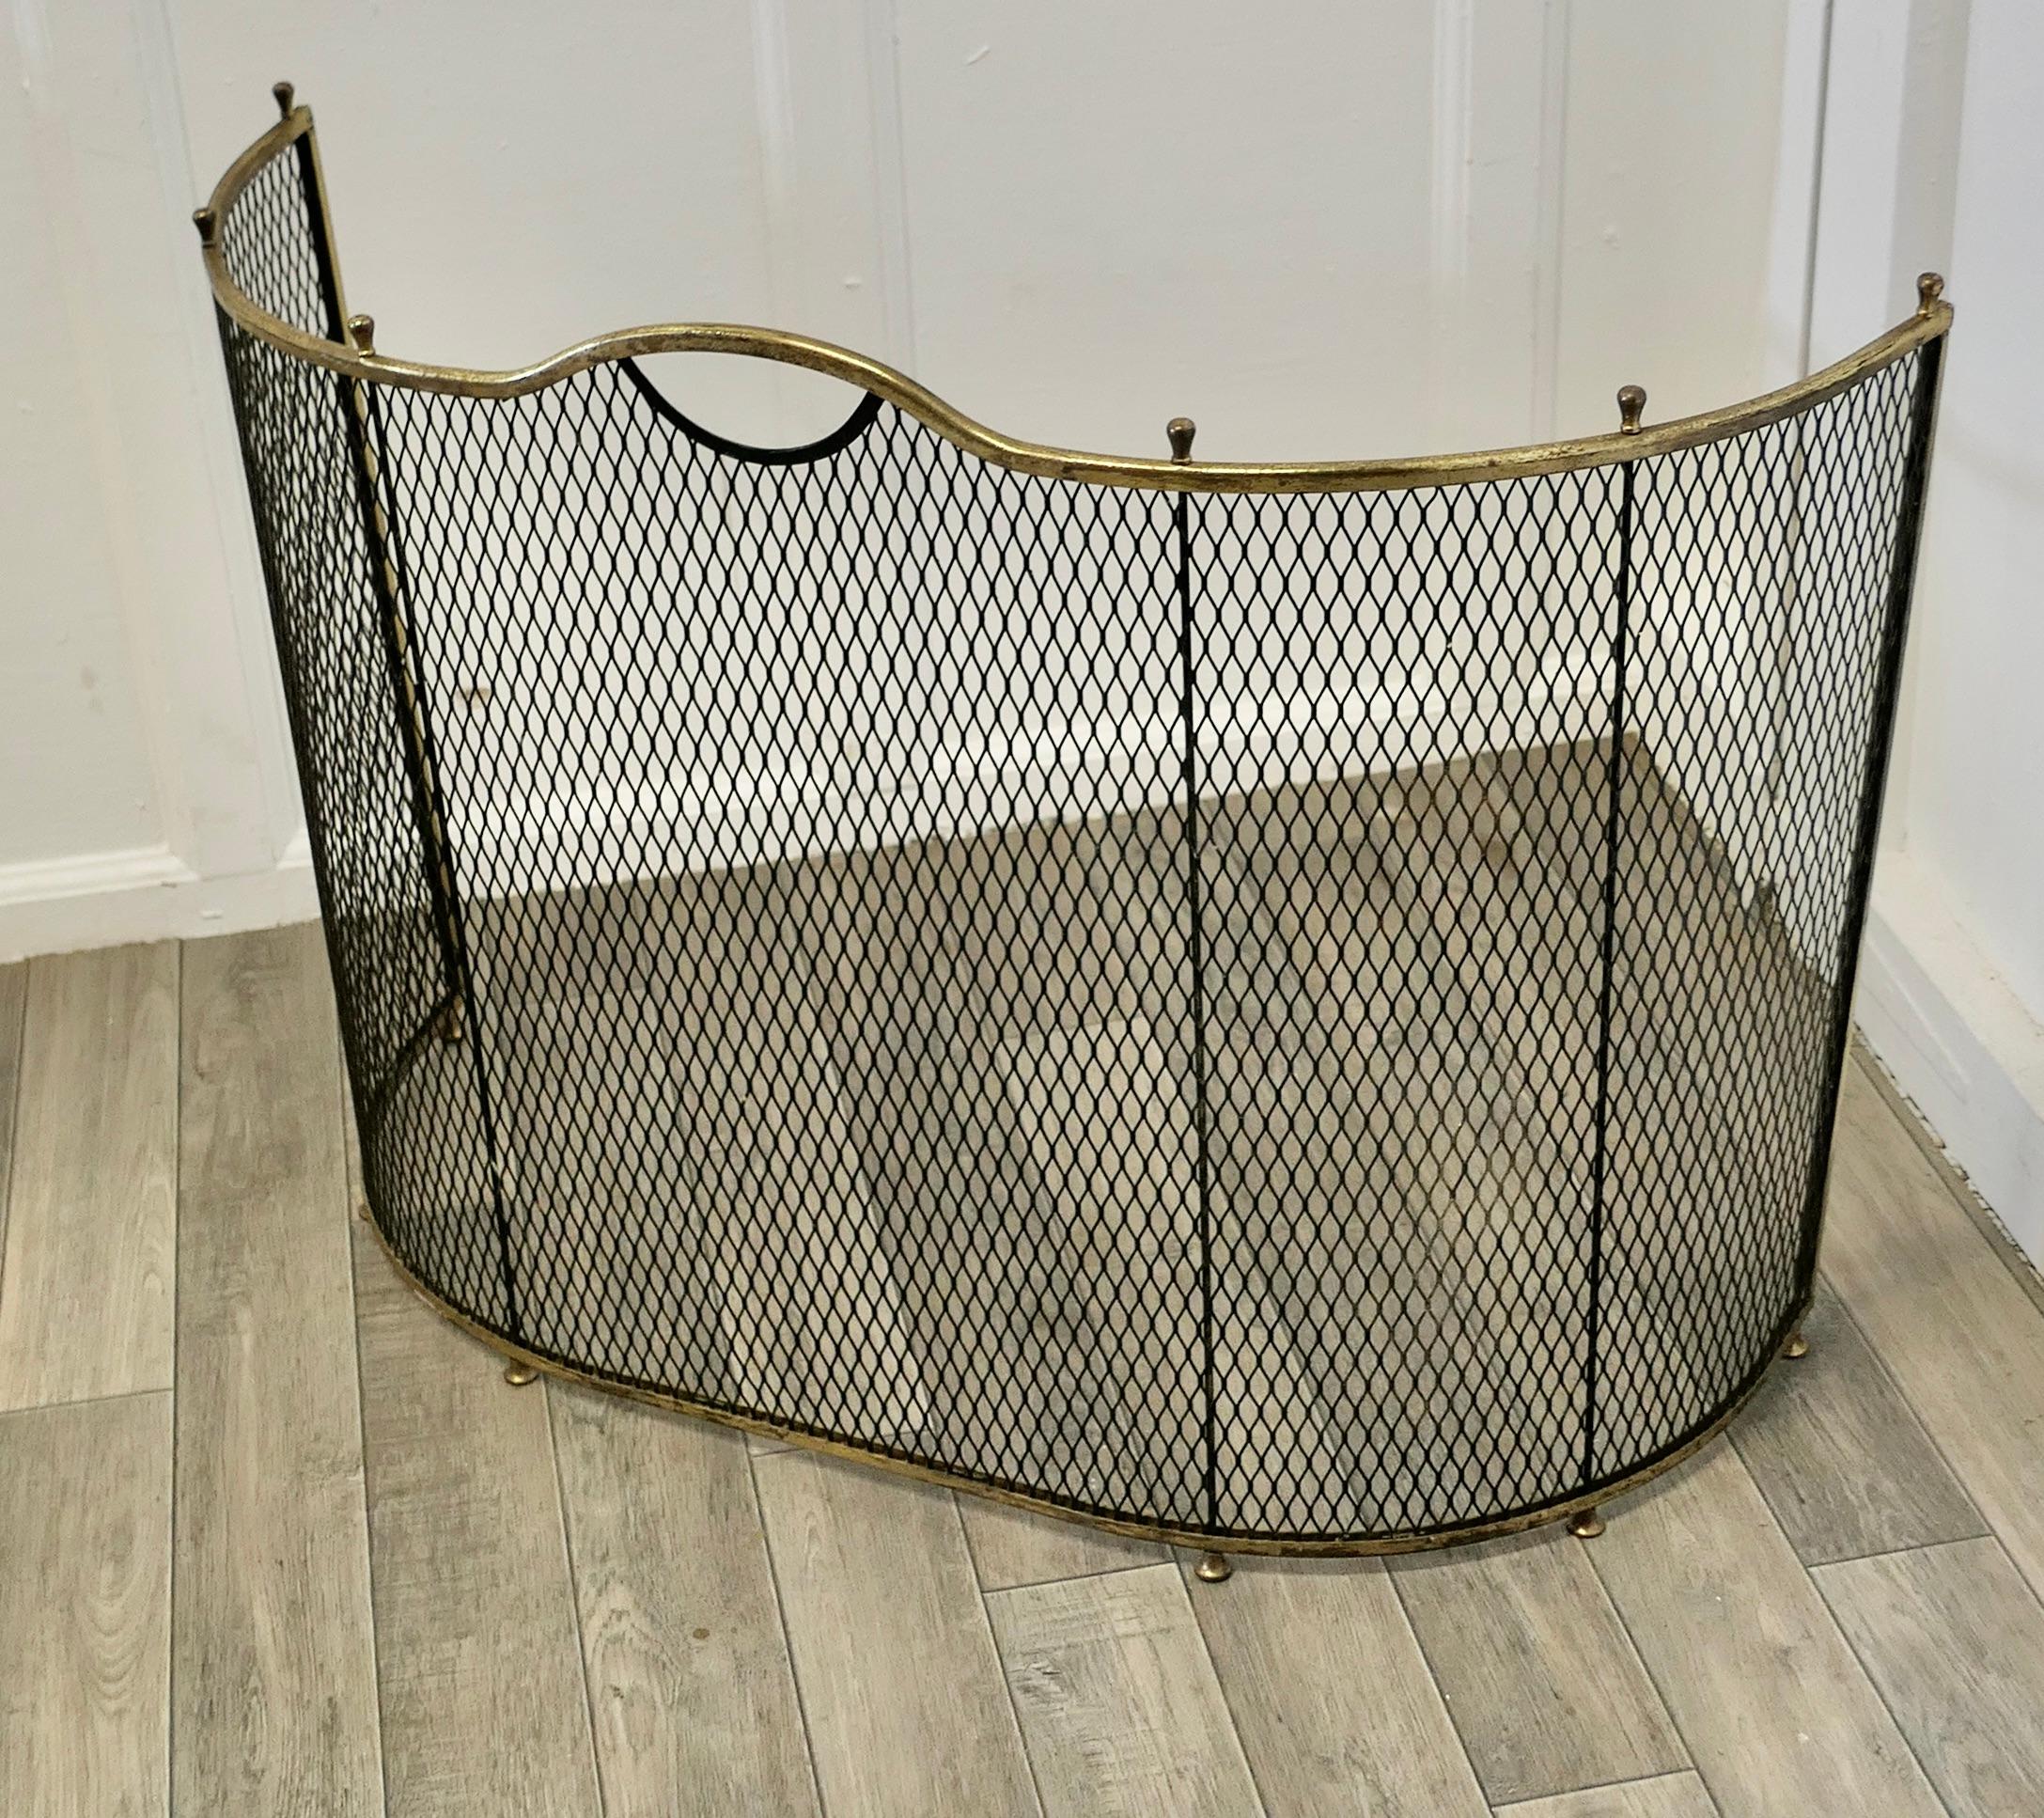 A Victorian curved brass and iron nursery fire guard


A Victorian antique fire guard often known as a nursery guard as it completely surrounds the fire.
The iron guard has a diamond mesh infill and a very pretty curved shaped with a brass